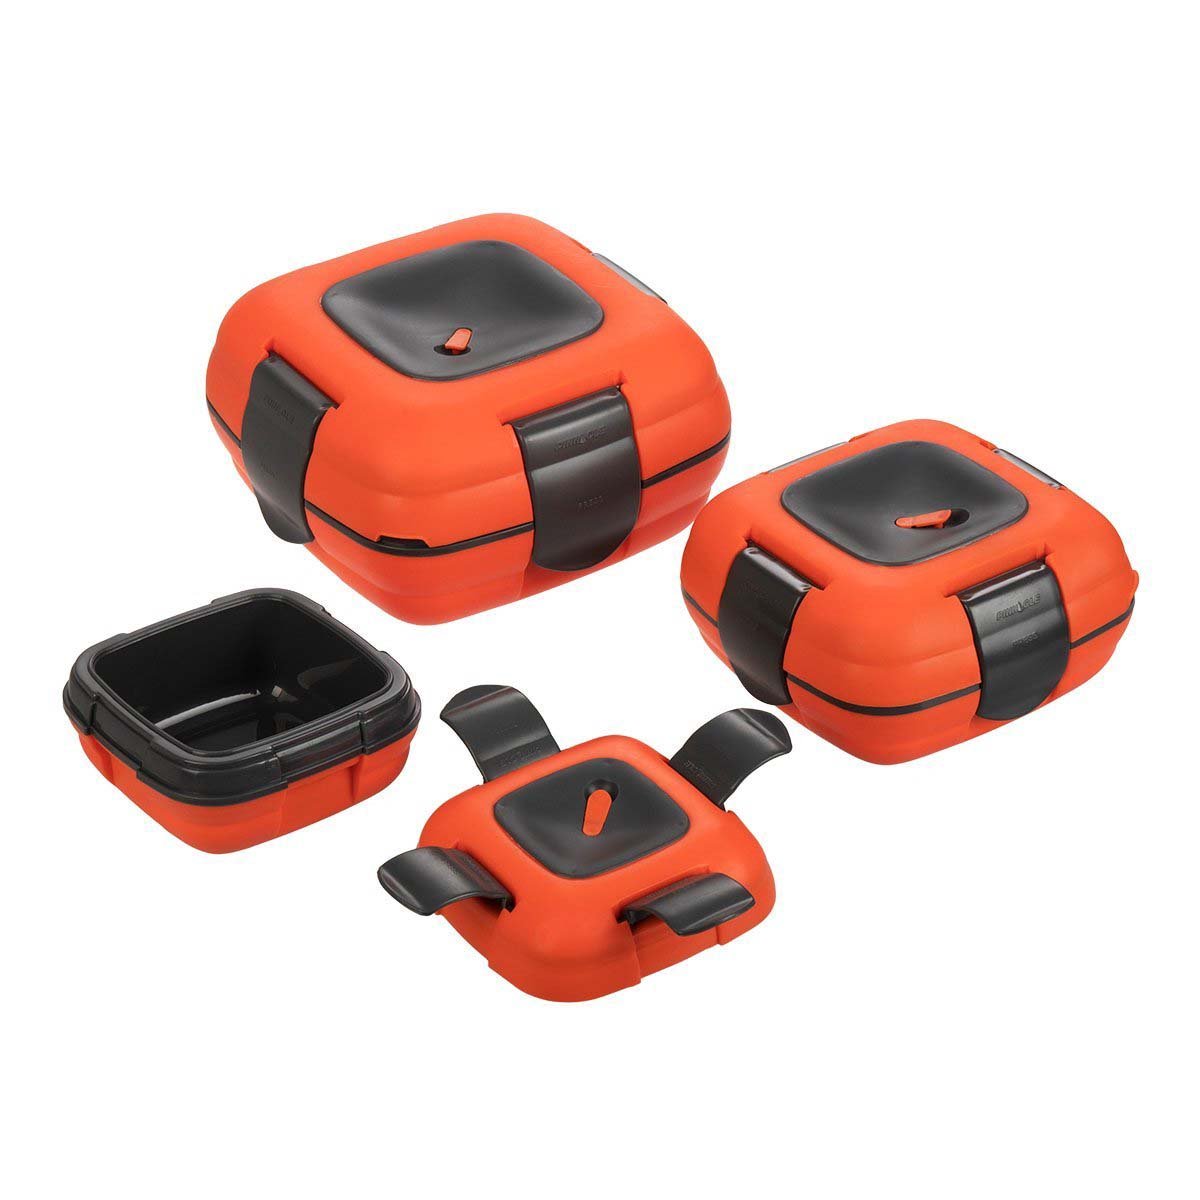 Paloma Set of 3 Orange Plastic Lunch Containers | Thermal Food Storage Boxes